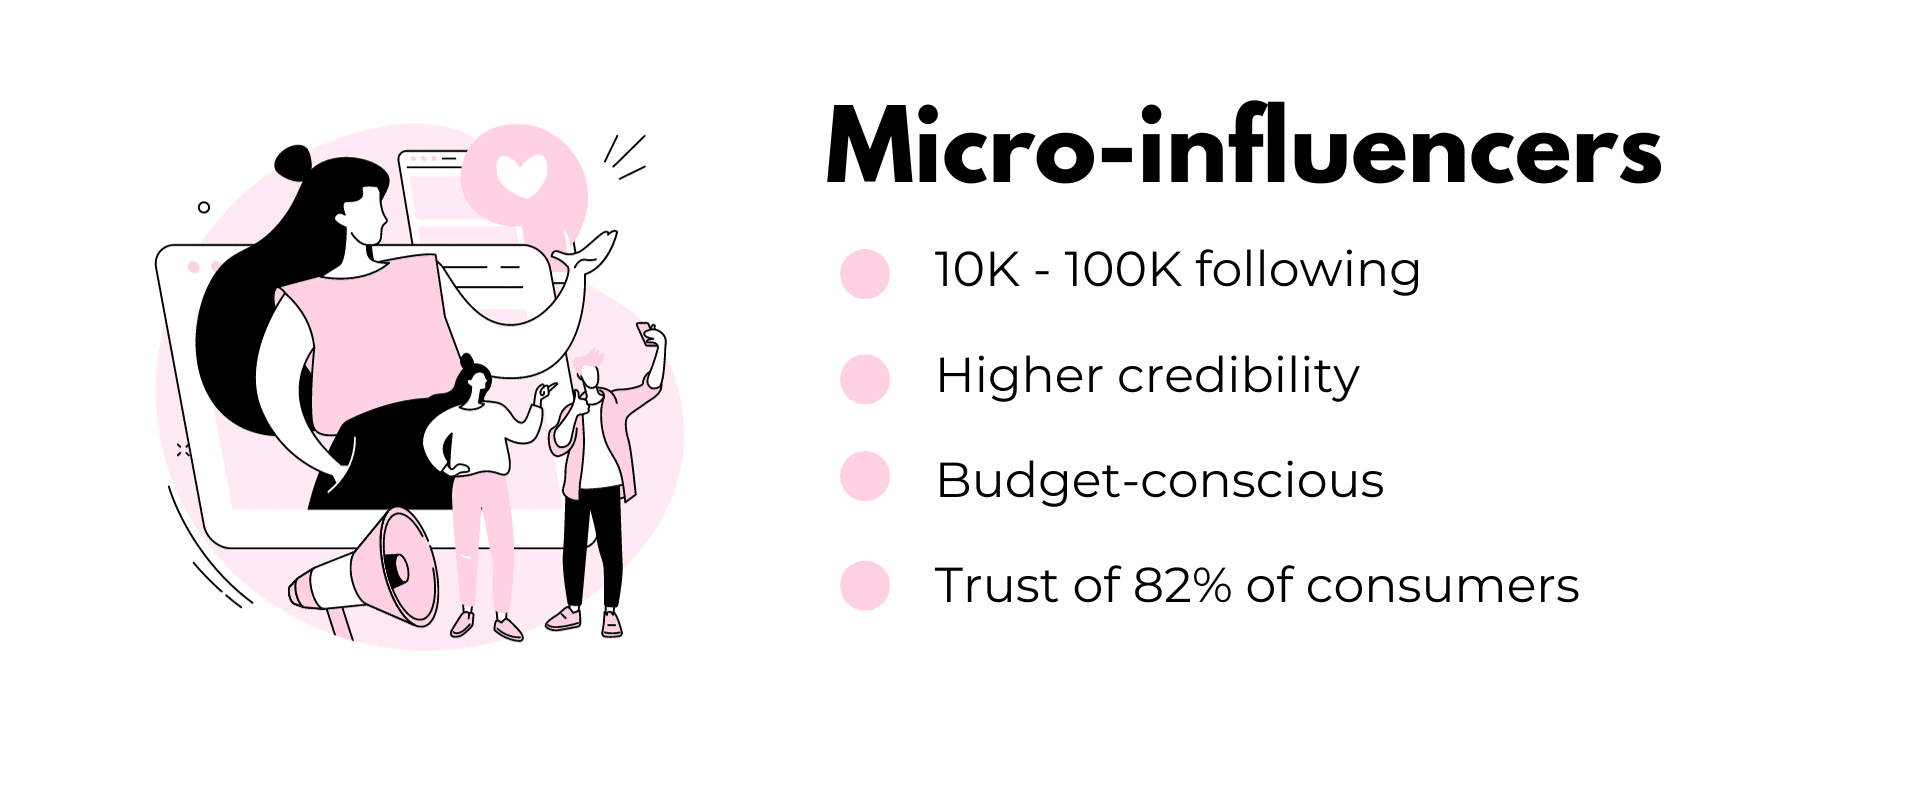 Micro-influencers - how to use micro-influencers.